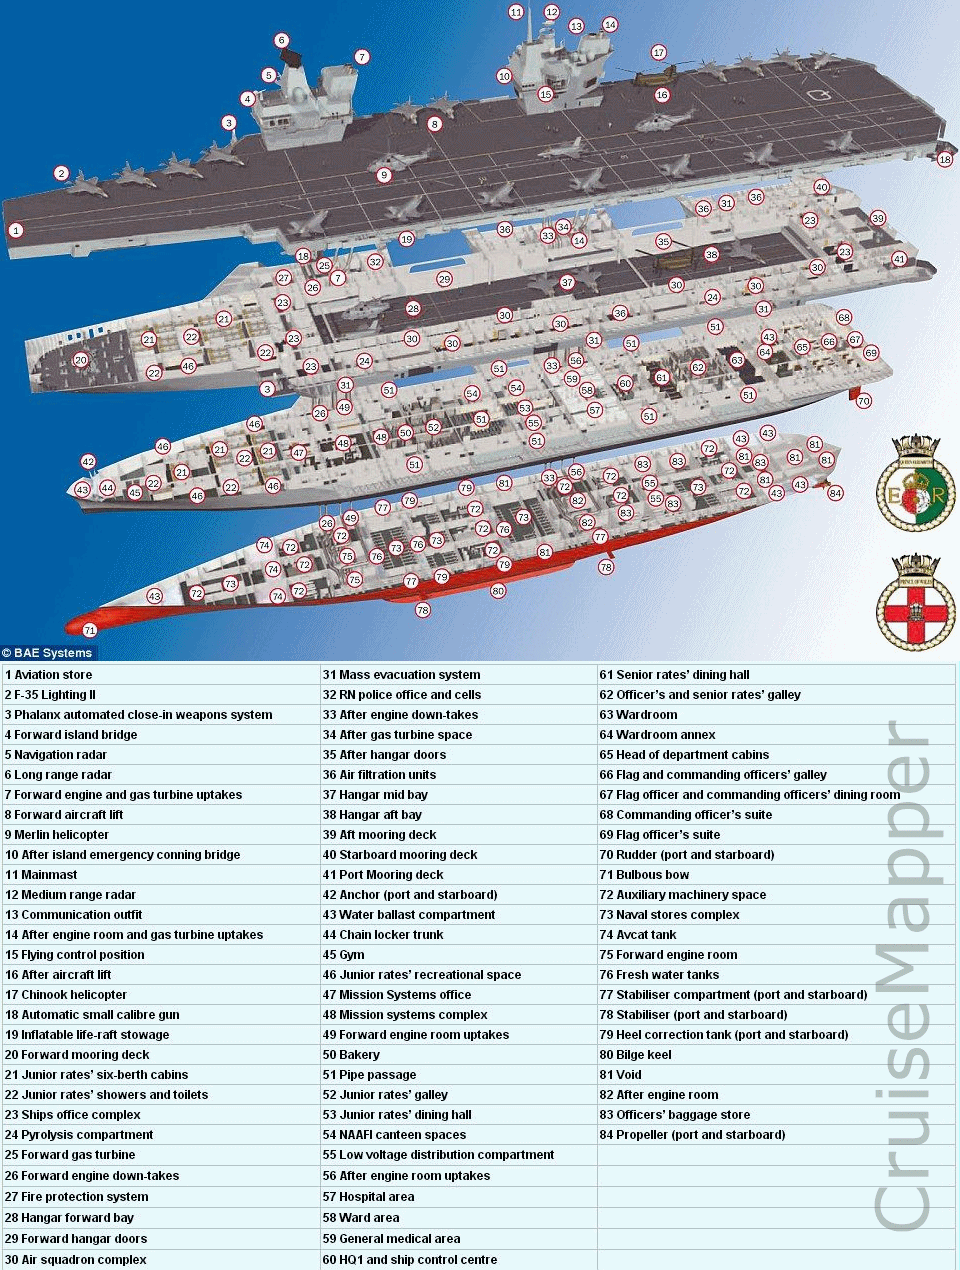 new UK aircraft carriers (deck plan) HMS Prince of Wales